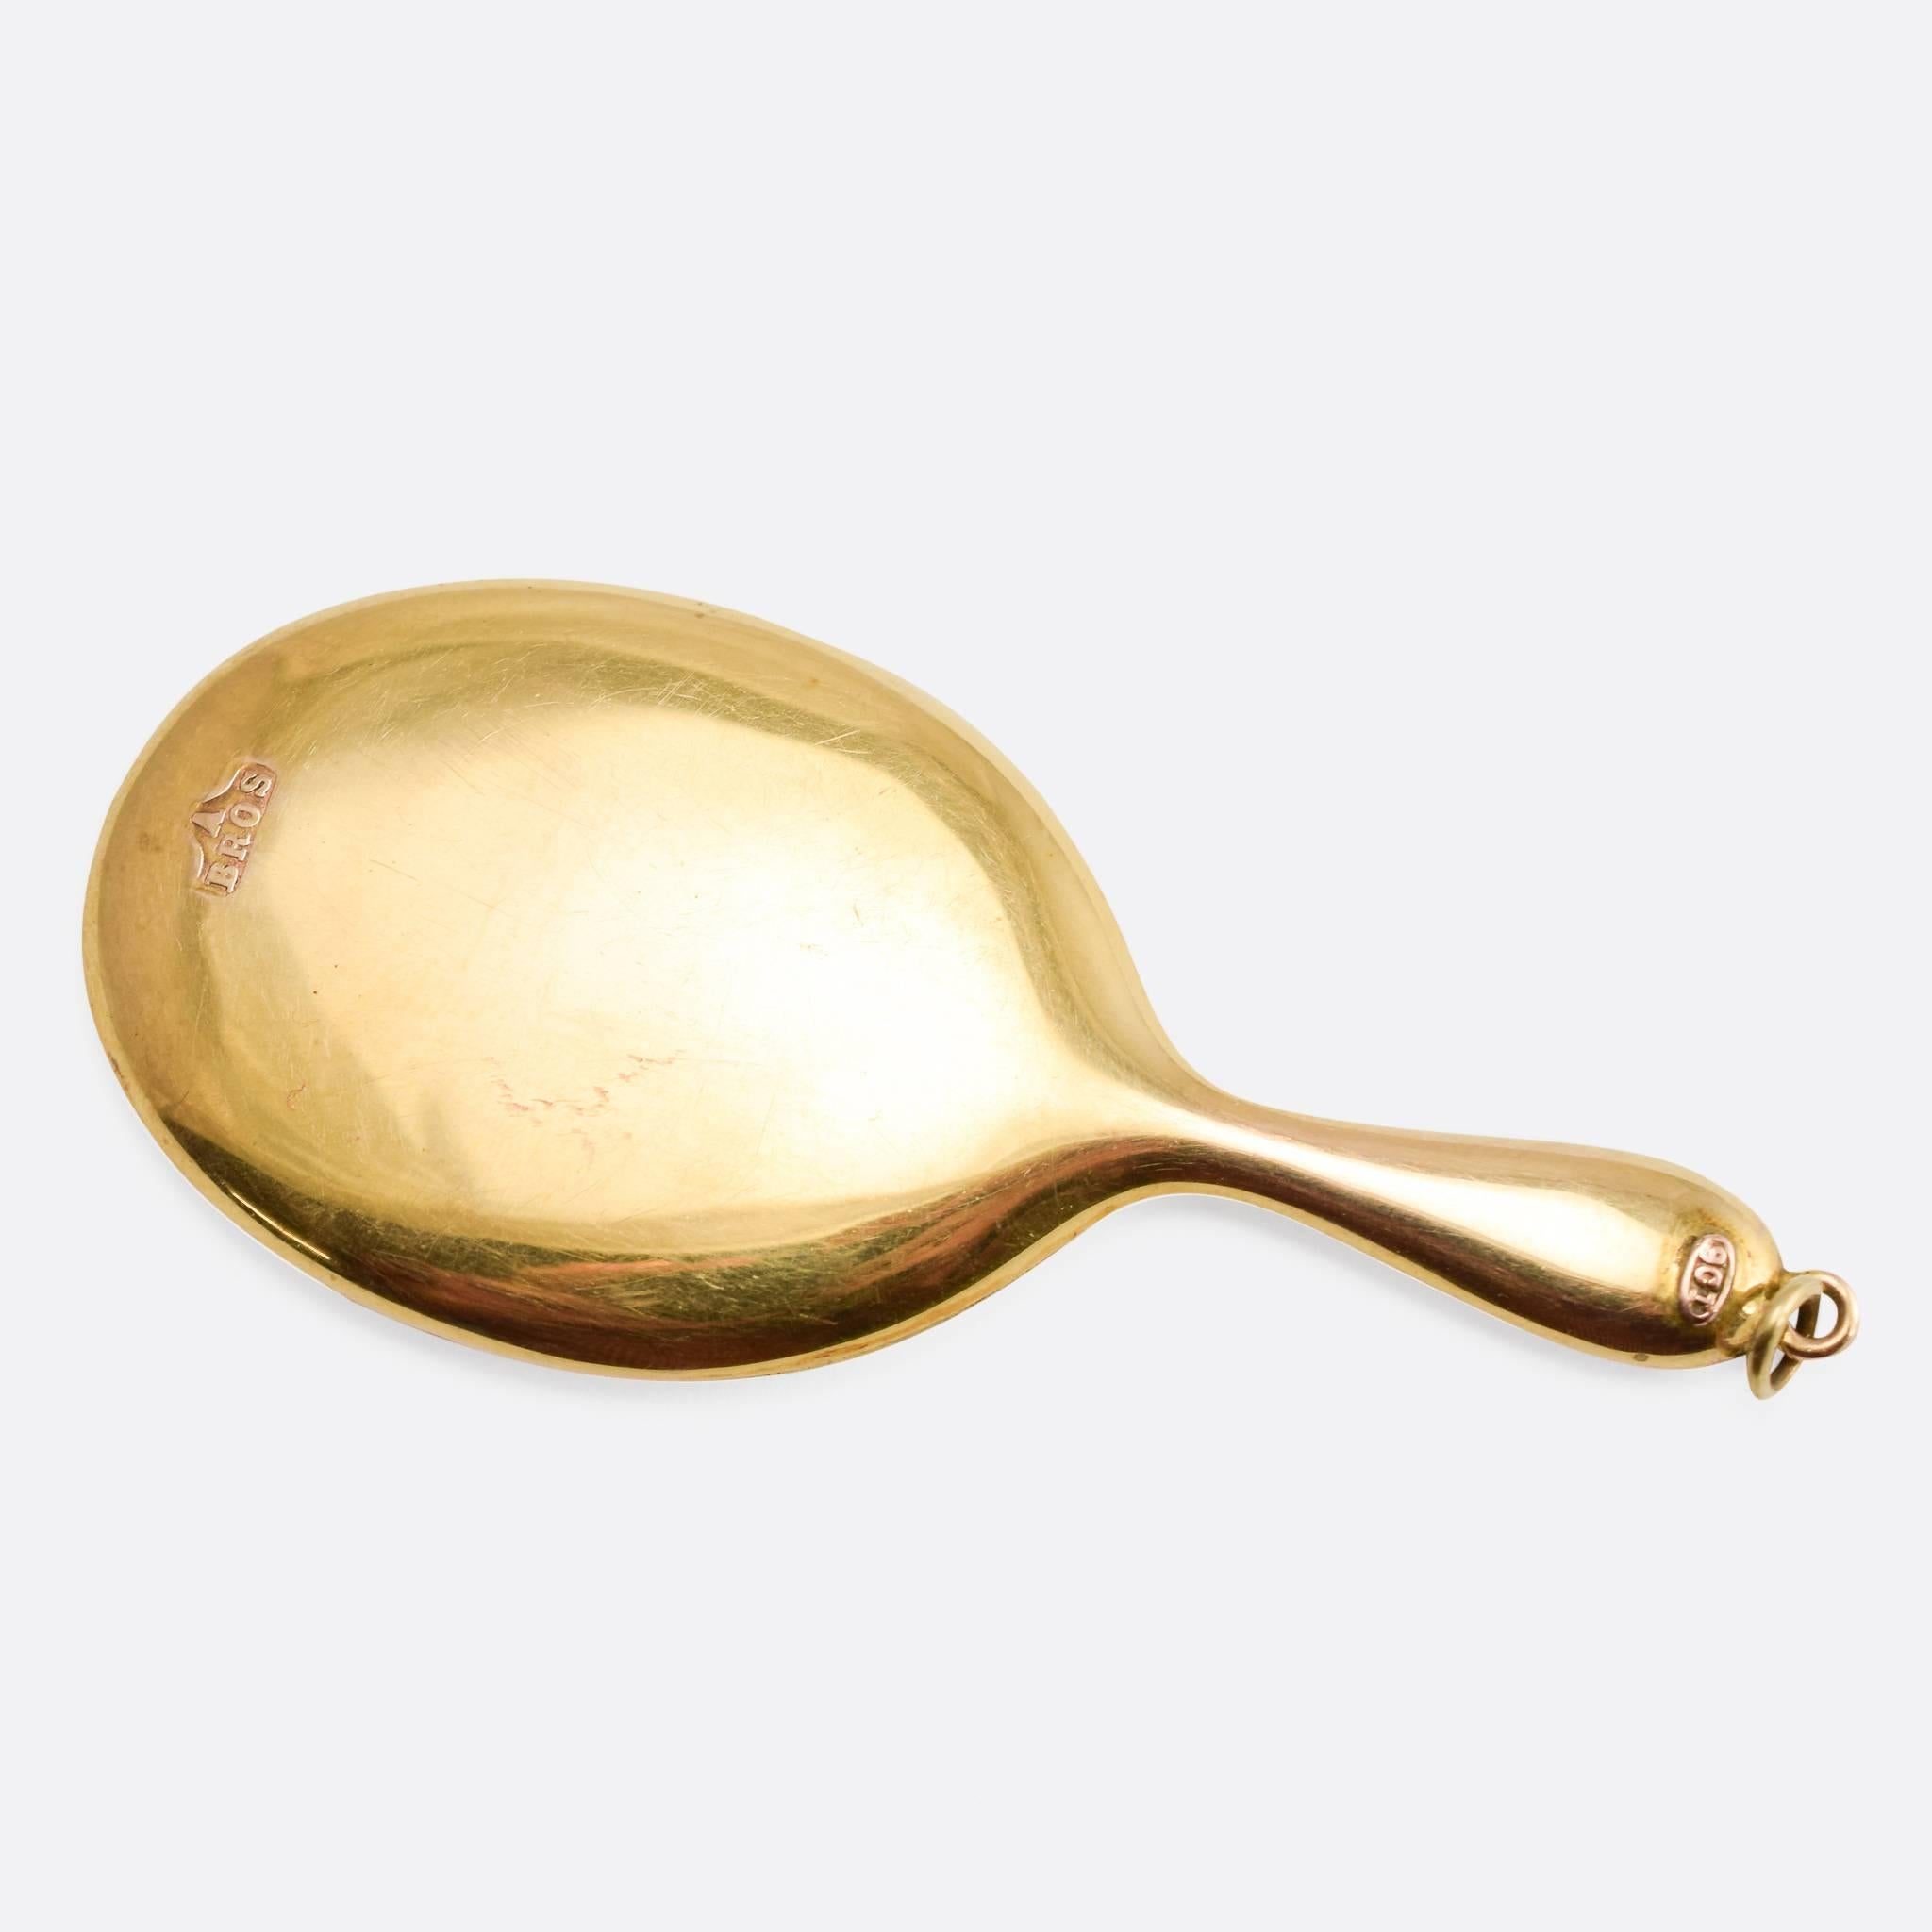 This antique pocket hand mirror is modelled in in 9ct gold, still paired with its original protective sleeve. It's made by the jewellery maker Abrahams Brothers, based on Vyse Street in Birmingham, likely in the early 1900s. With bail for wear as a